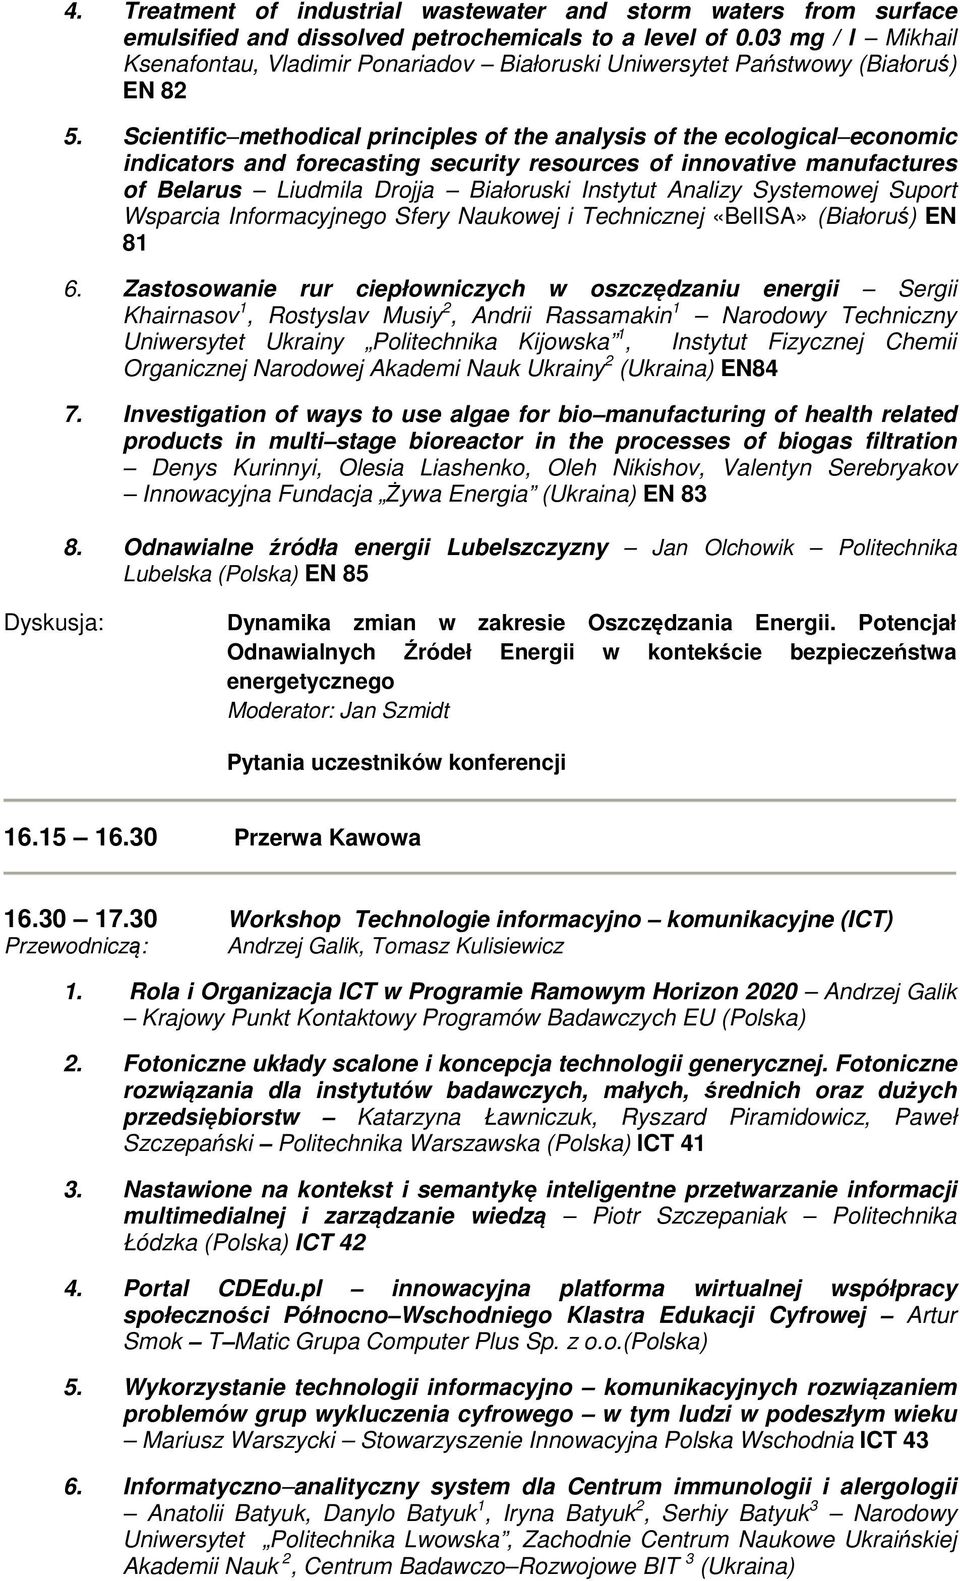 Scientific methodical principles of the analysis of the ecological economic indicators and forecasting security resources of innovative manufactures of Belarus Liudmila Drojja Białoruski Instytut